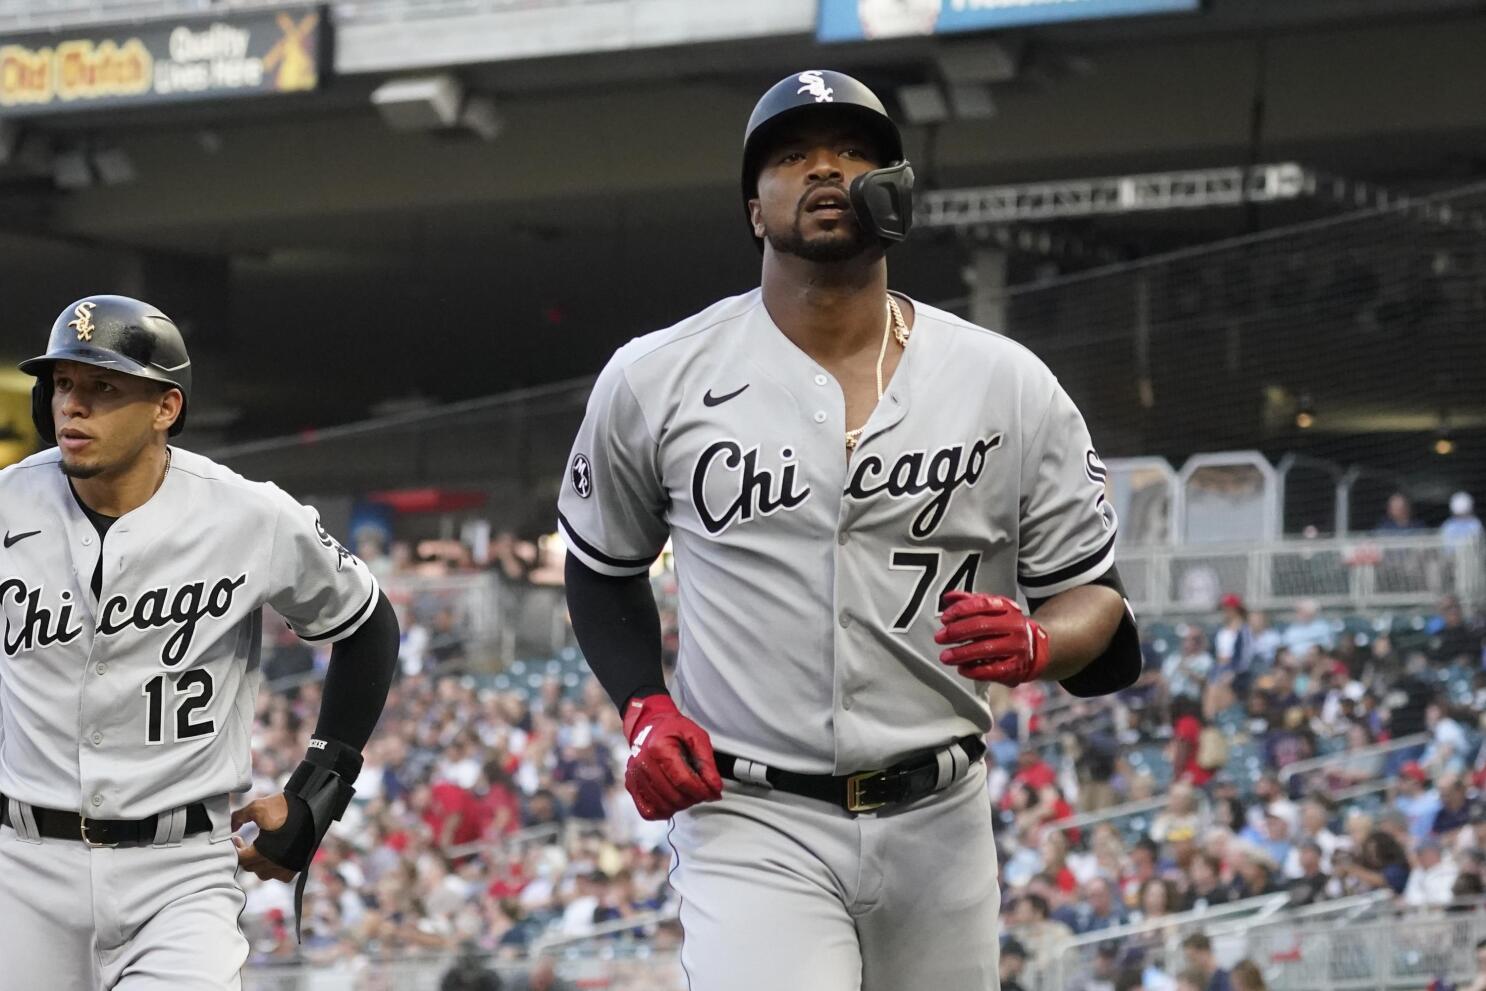 Has a White Sox player ever won the MLB Home Run Derby?